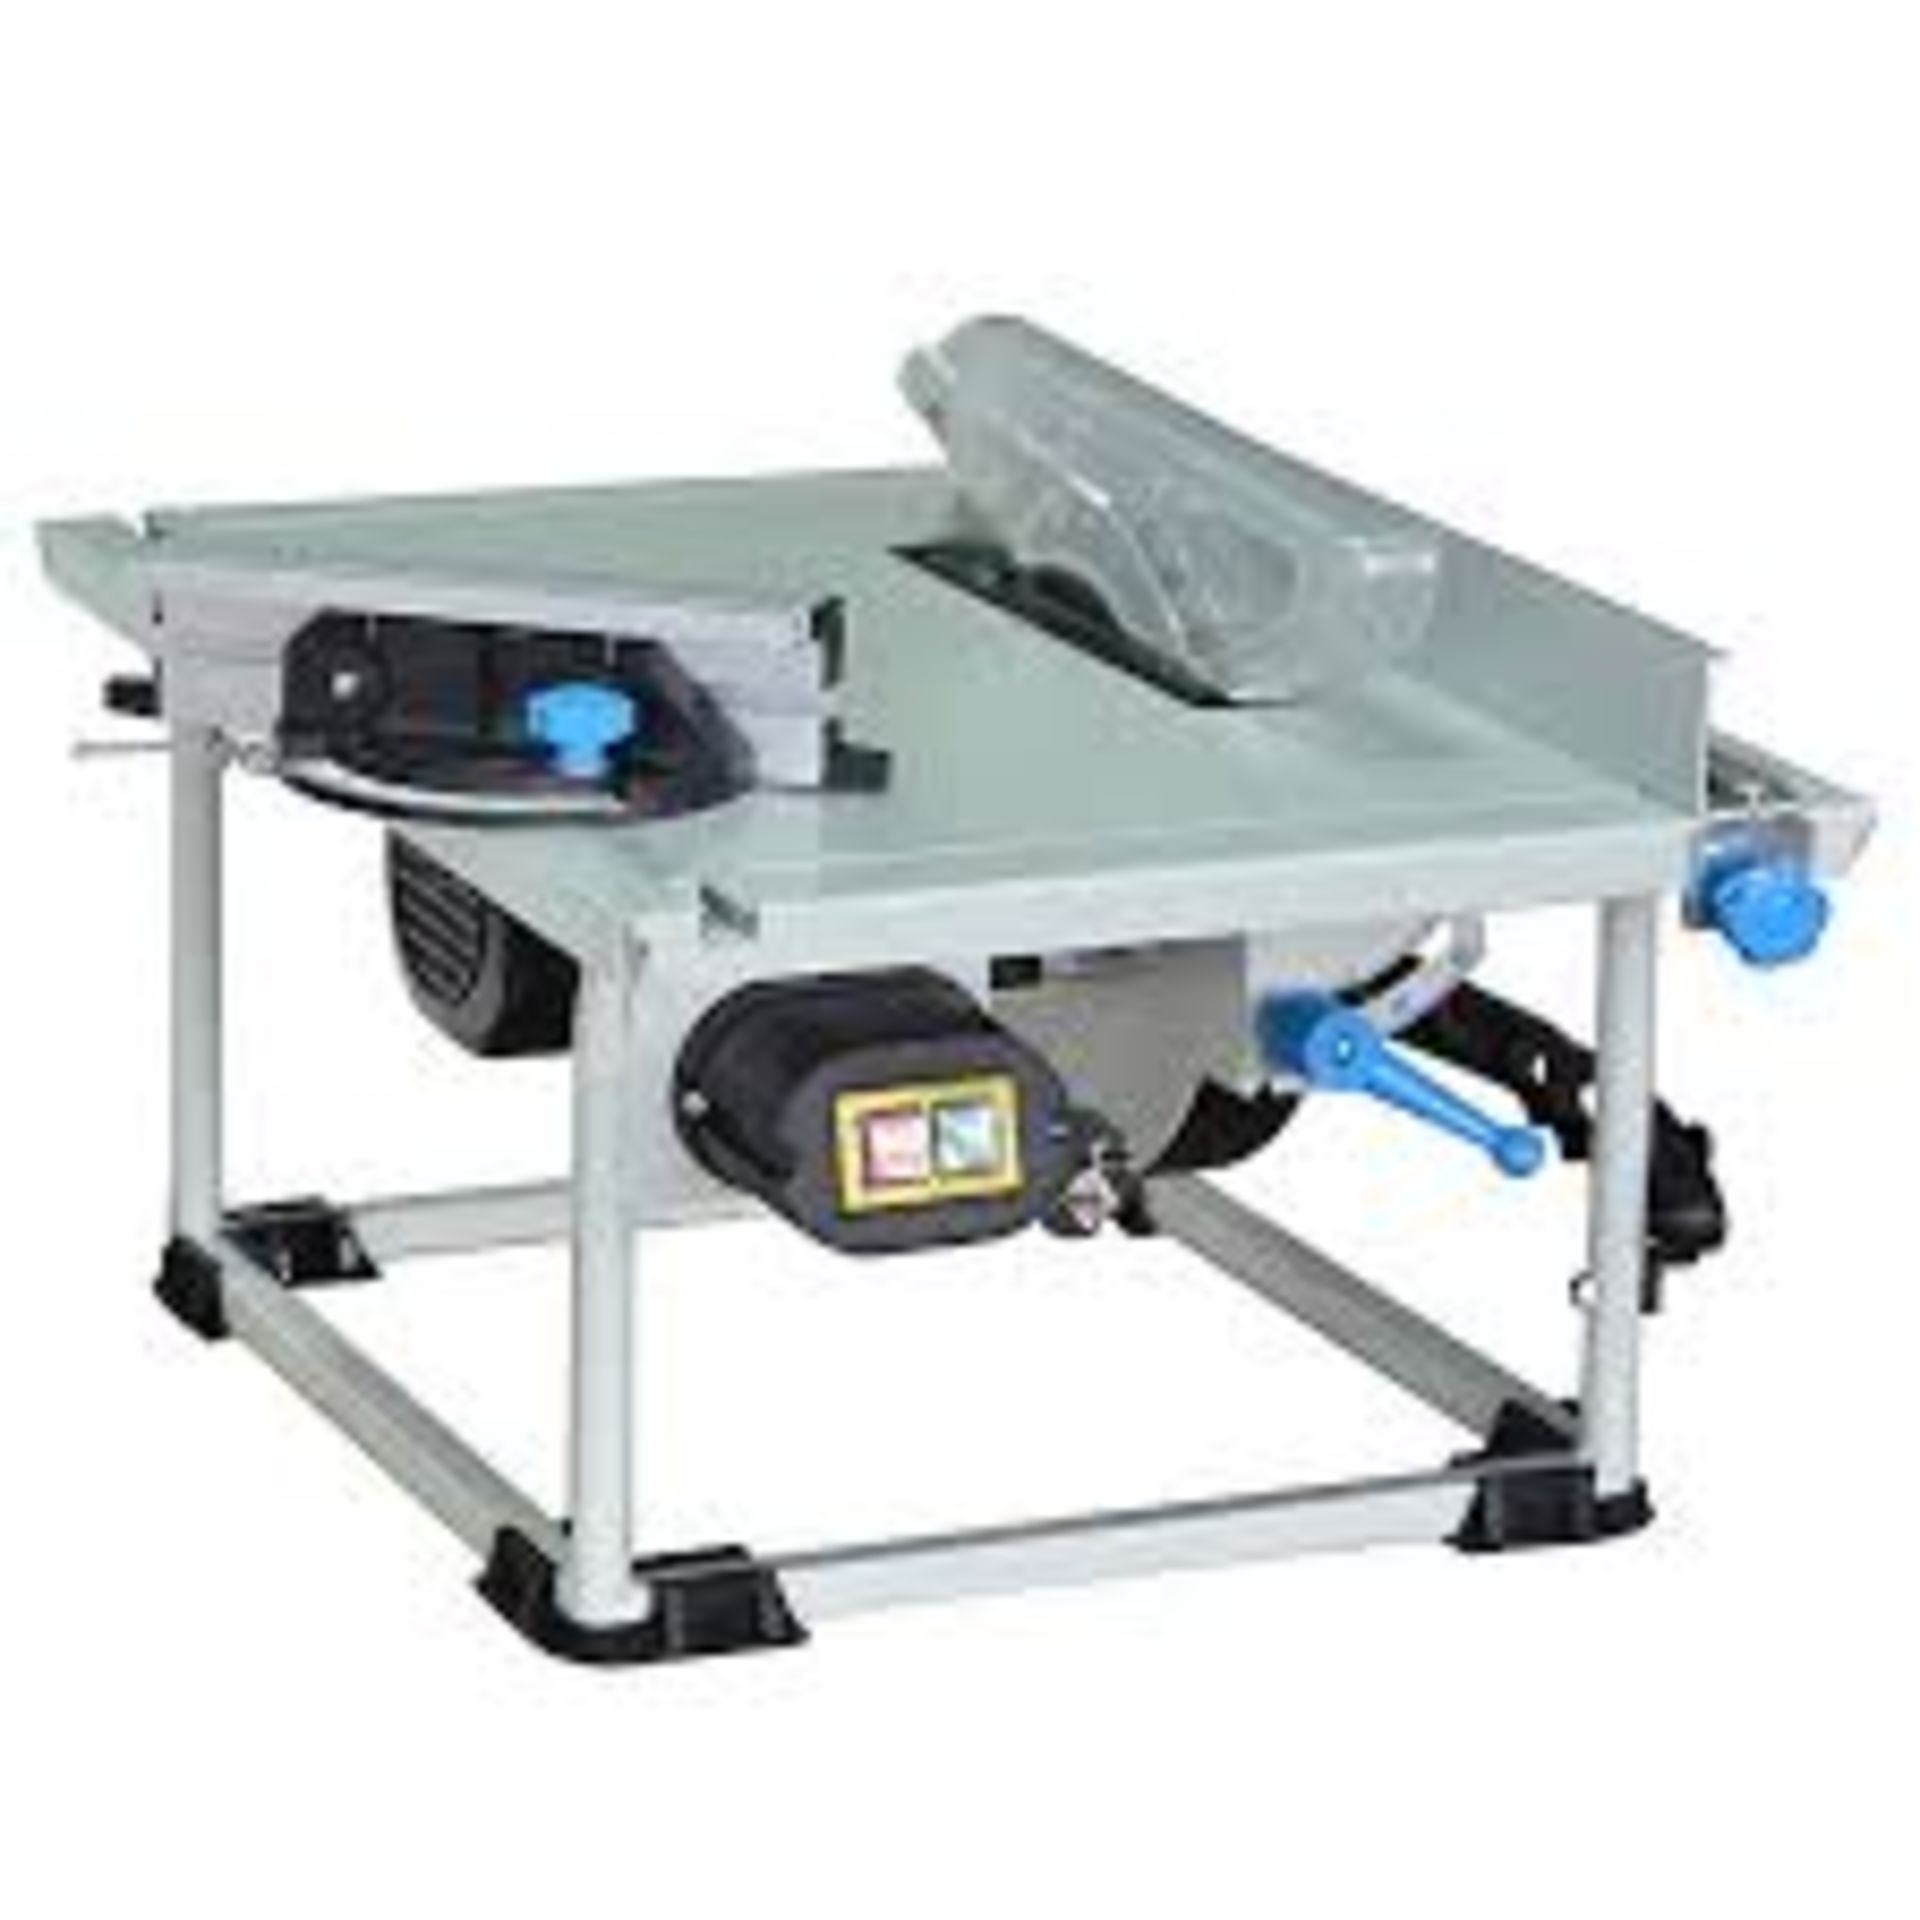 Mac Allister 800W 240V 200mm Corded Table saw MTSP800B. - PW. Ideal for cutting wood with a 43mm